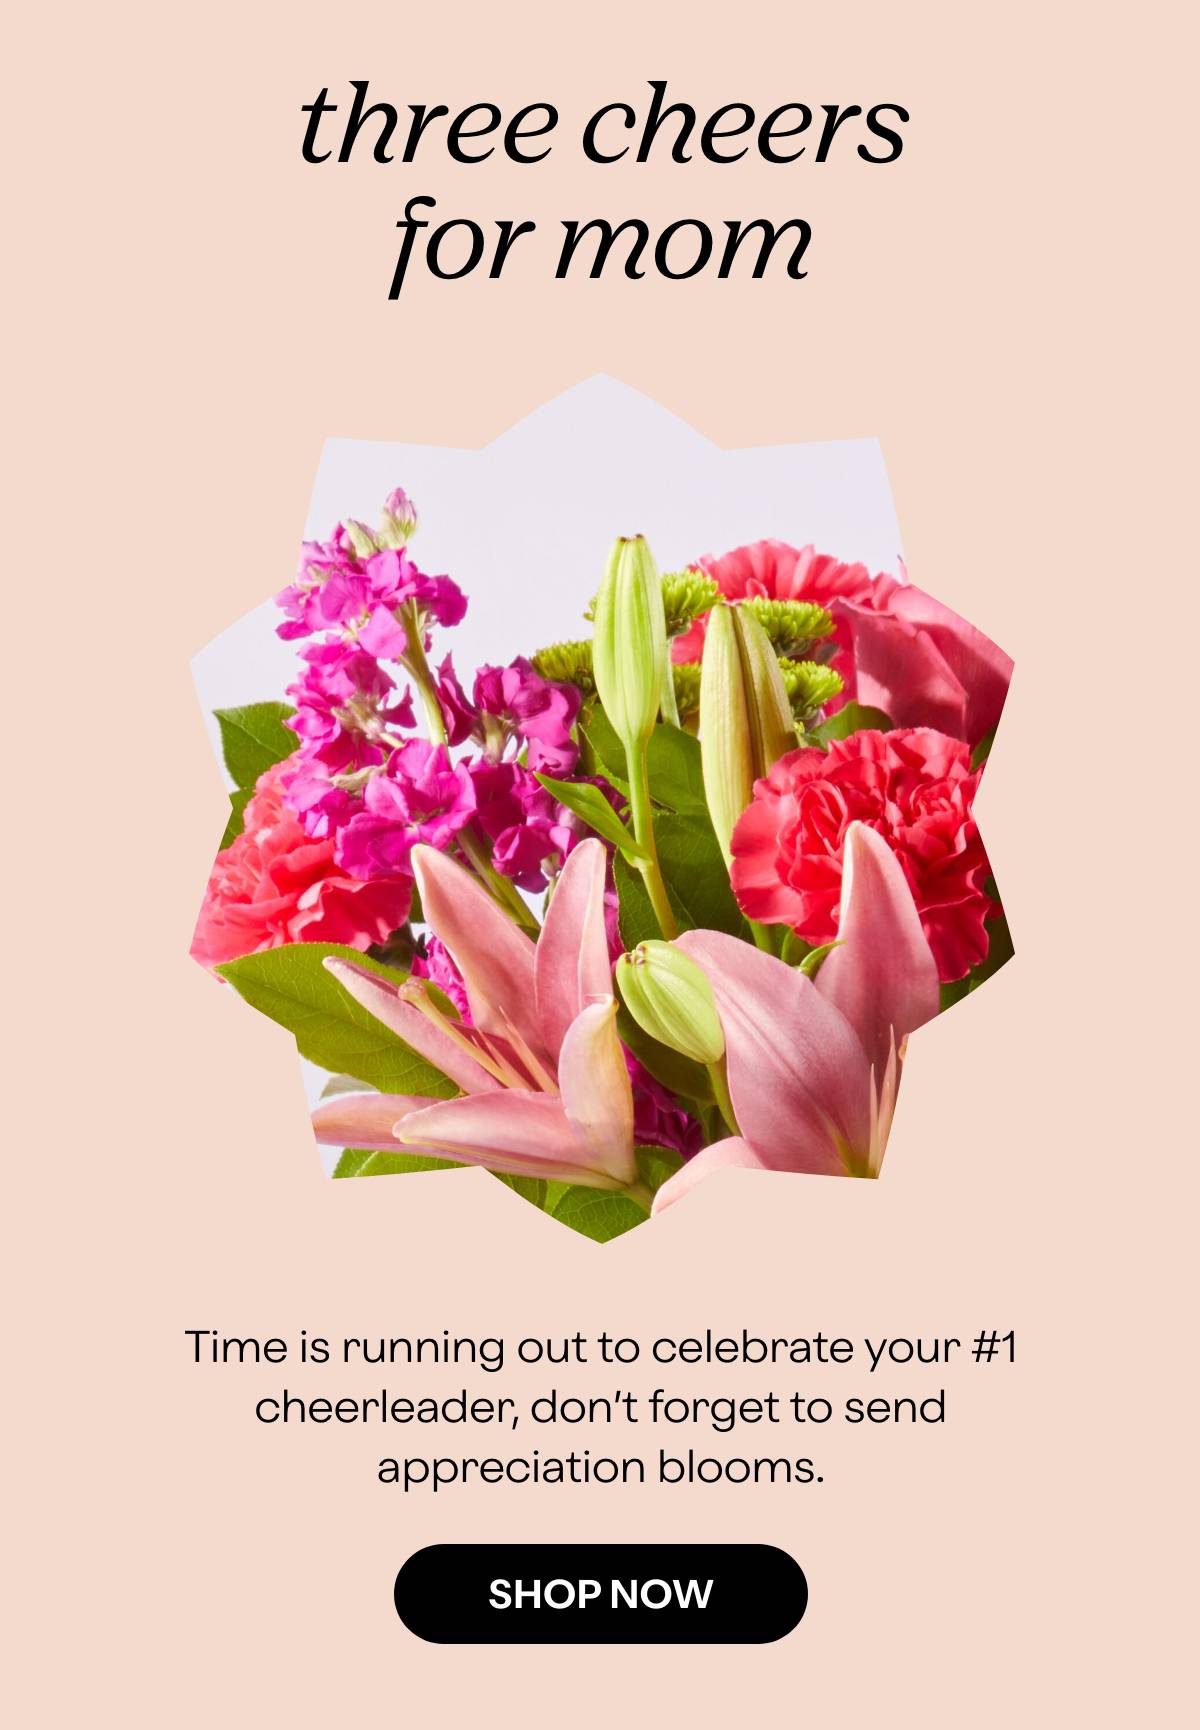 three cheers for mom - Time is running out to celebrate your #1 cheerleader, don't forget to send appreciation blooms. - SHOP NOW 